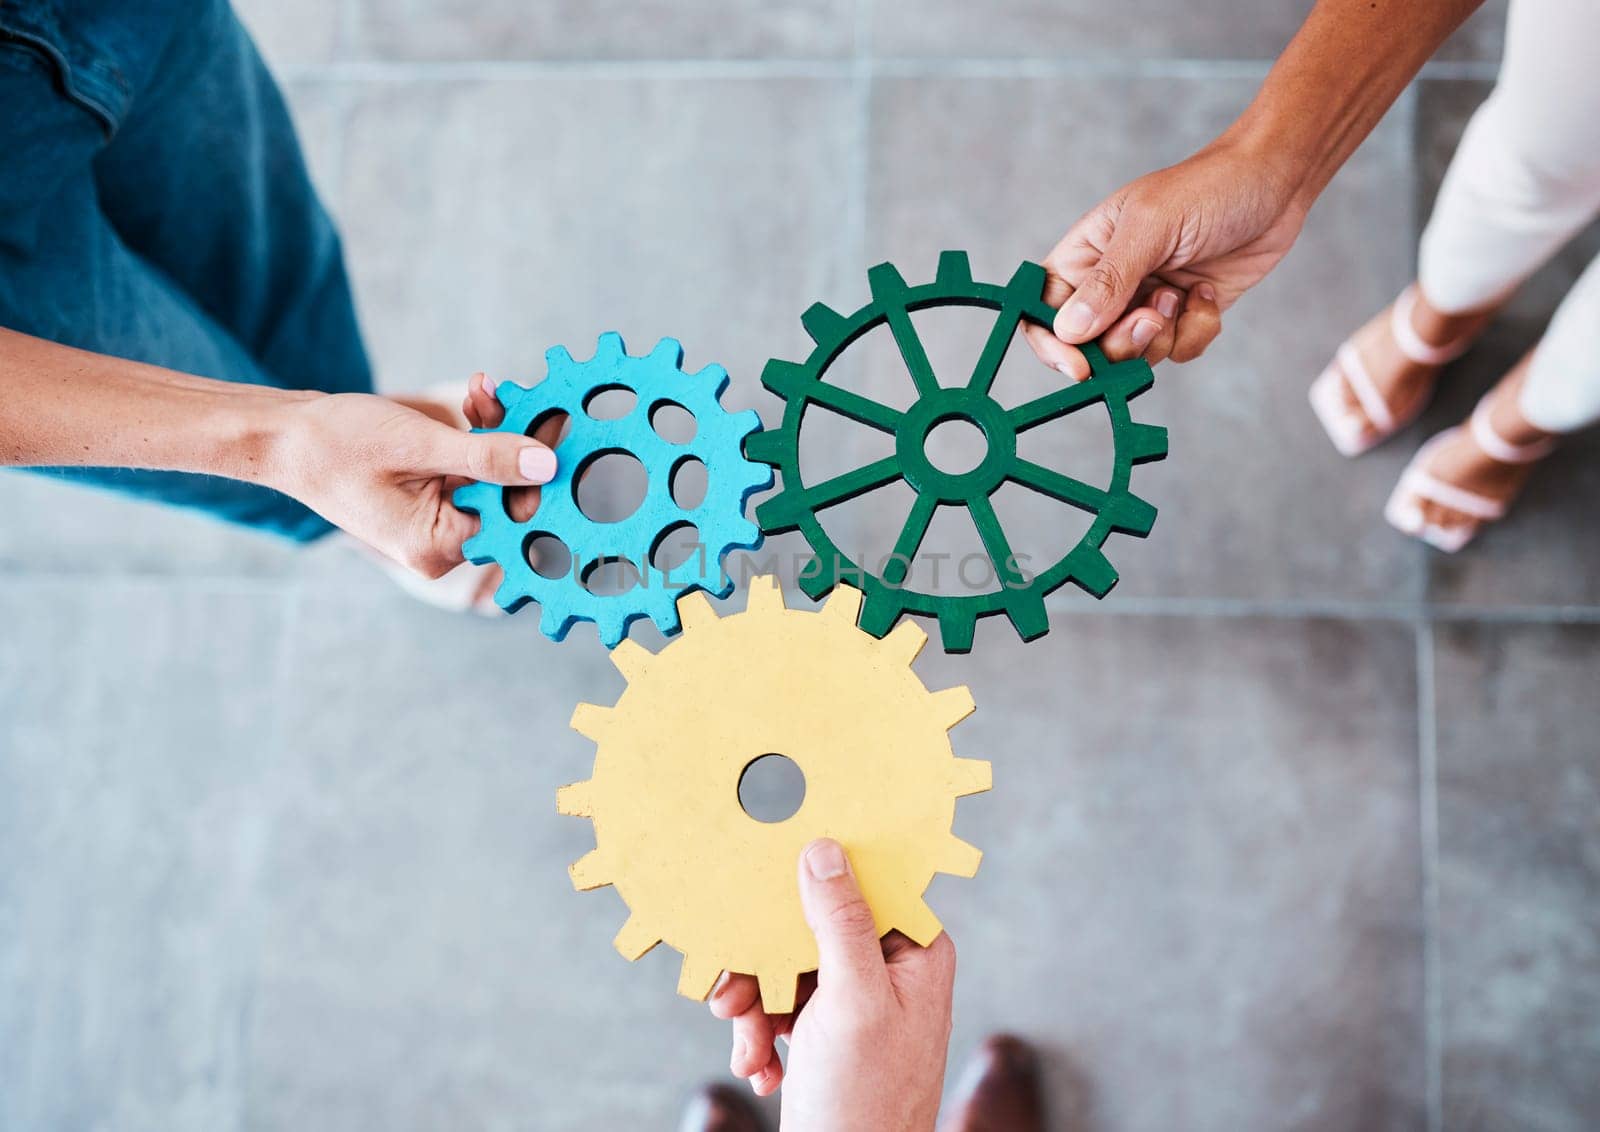 Settings, gear icon and teamwork with business people or team together for collaboration and synergy with cog wheel strategy. Office group hands for problem solving, innovation and development.